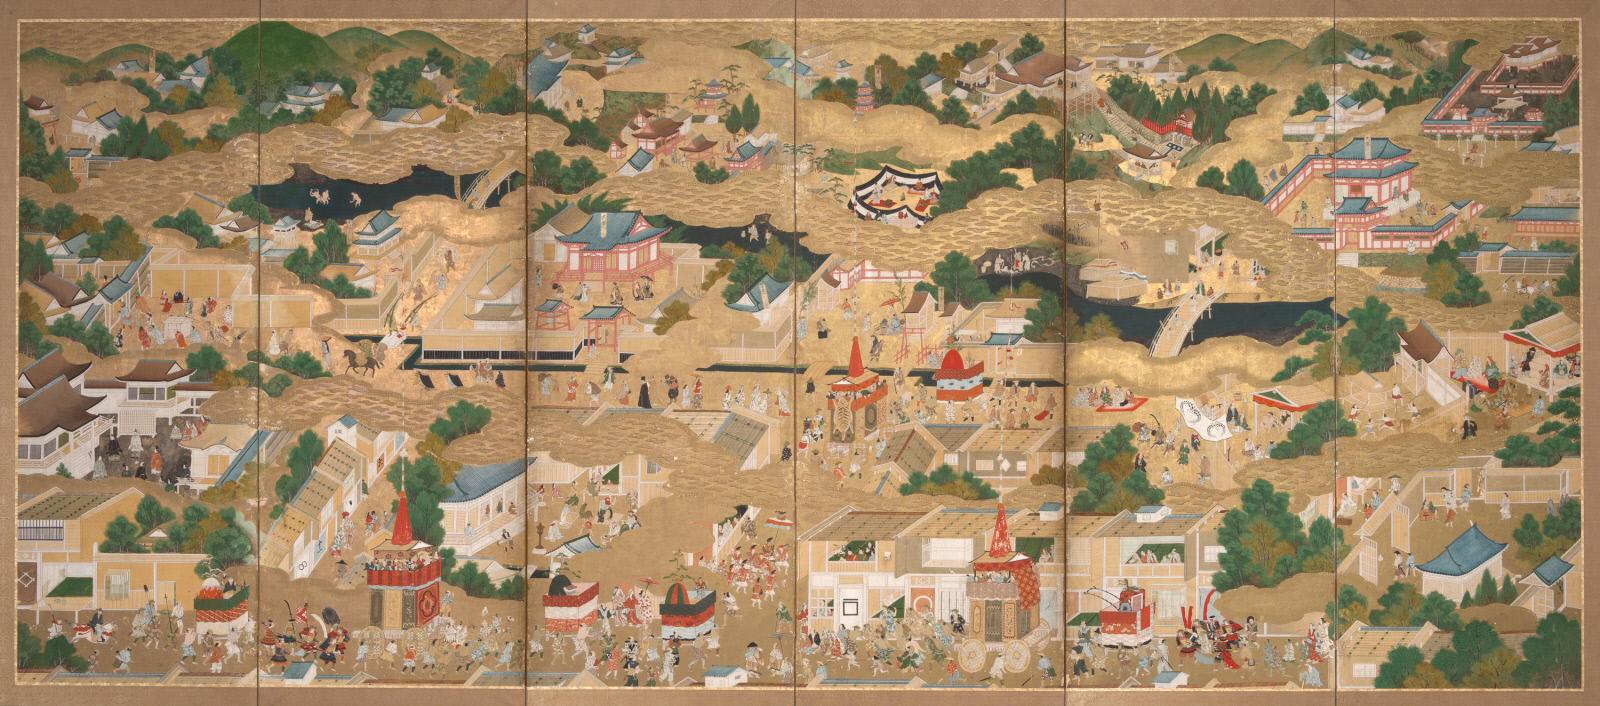 Image:   Scenes in and Around Kyoto (Rakuchu Rakugai-zu)  Japan, mid-17th century  Ink, pigments, and gold leaf on paper  h. 66 in. (167.6 cm); w. 144 in. (365.8 cm)  Purchased with funds provided by the Lillie and Roy Cullen Endowment, 2001.51.a-b